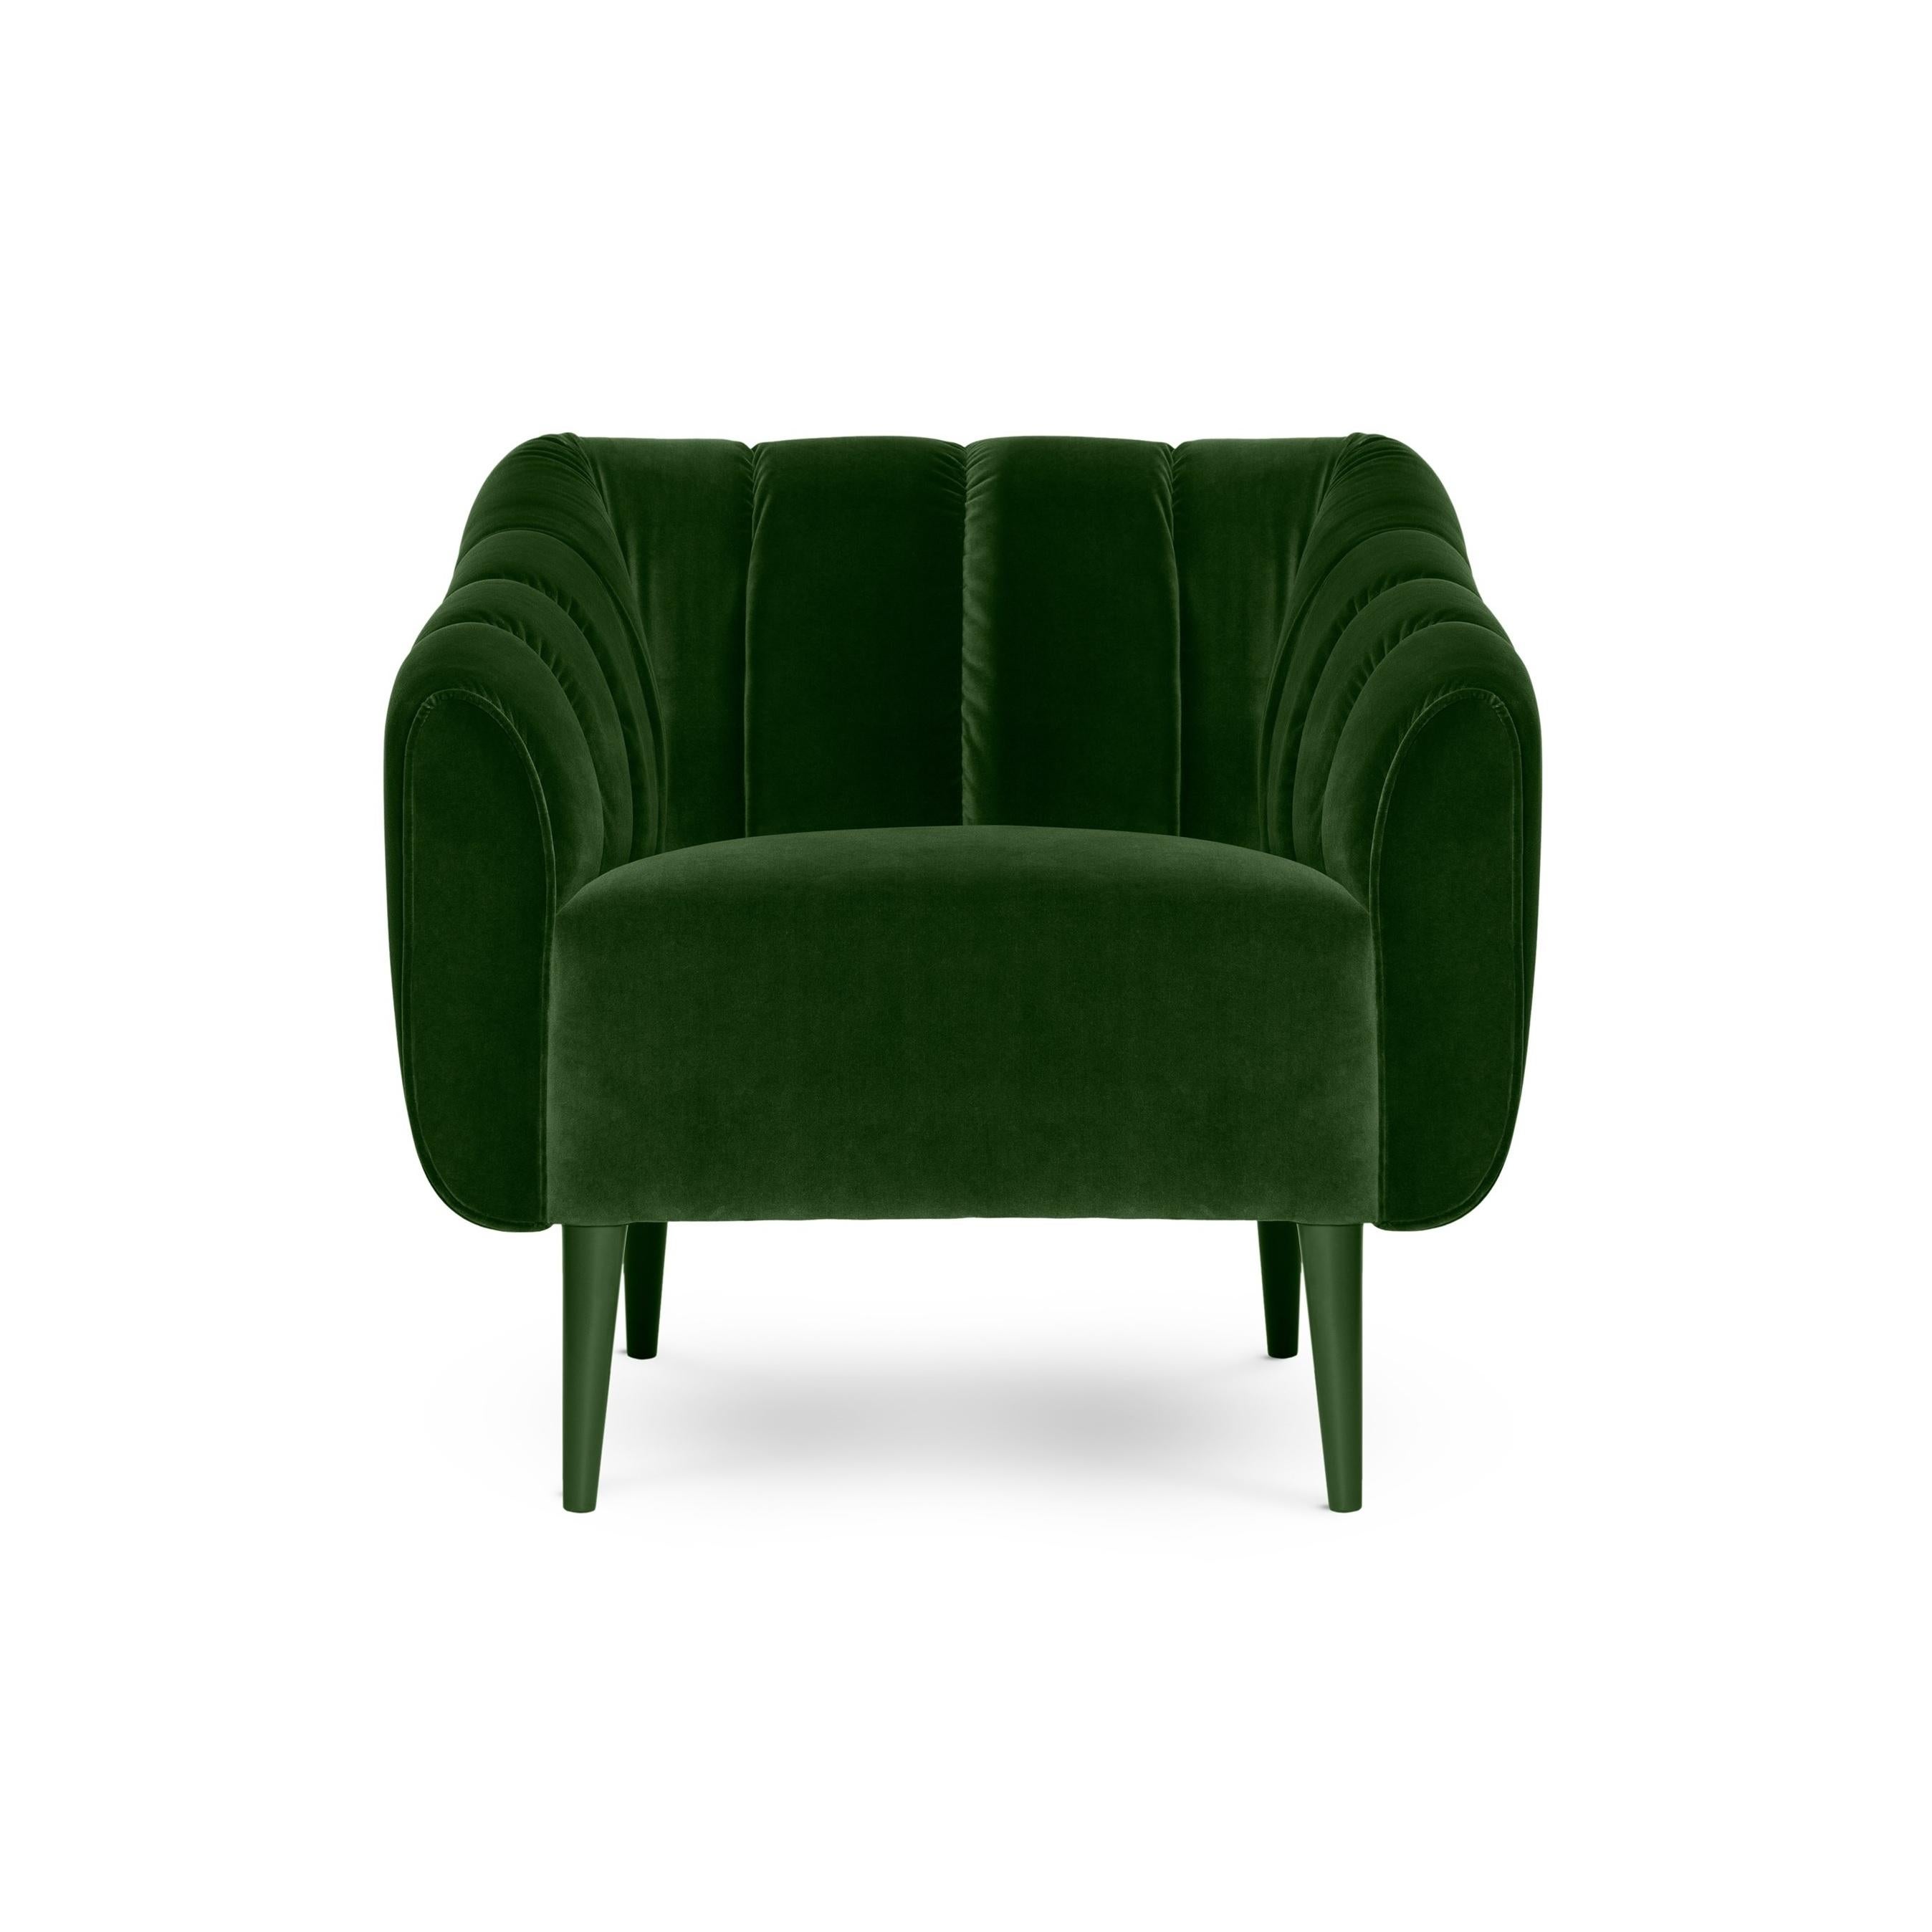 Designed with a thorough but playful attention to geometry and form, this armchair has a glamorous 60s and 70s sci-fi retro look. Its quilted upholstery is reminiscent of the midcentury aesthetic, with proportions suited for contemporary living